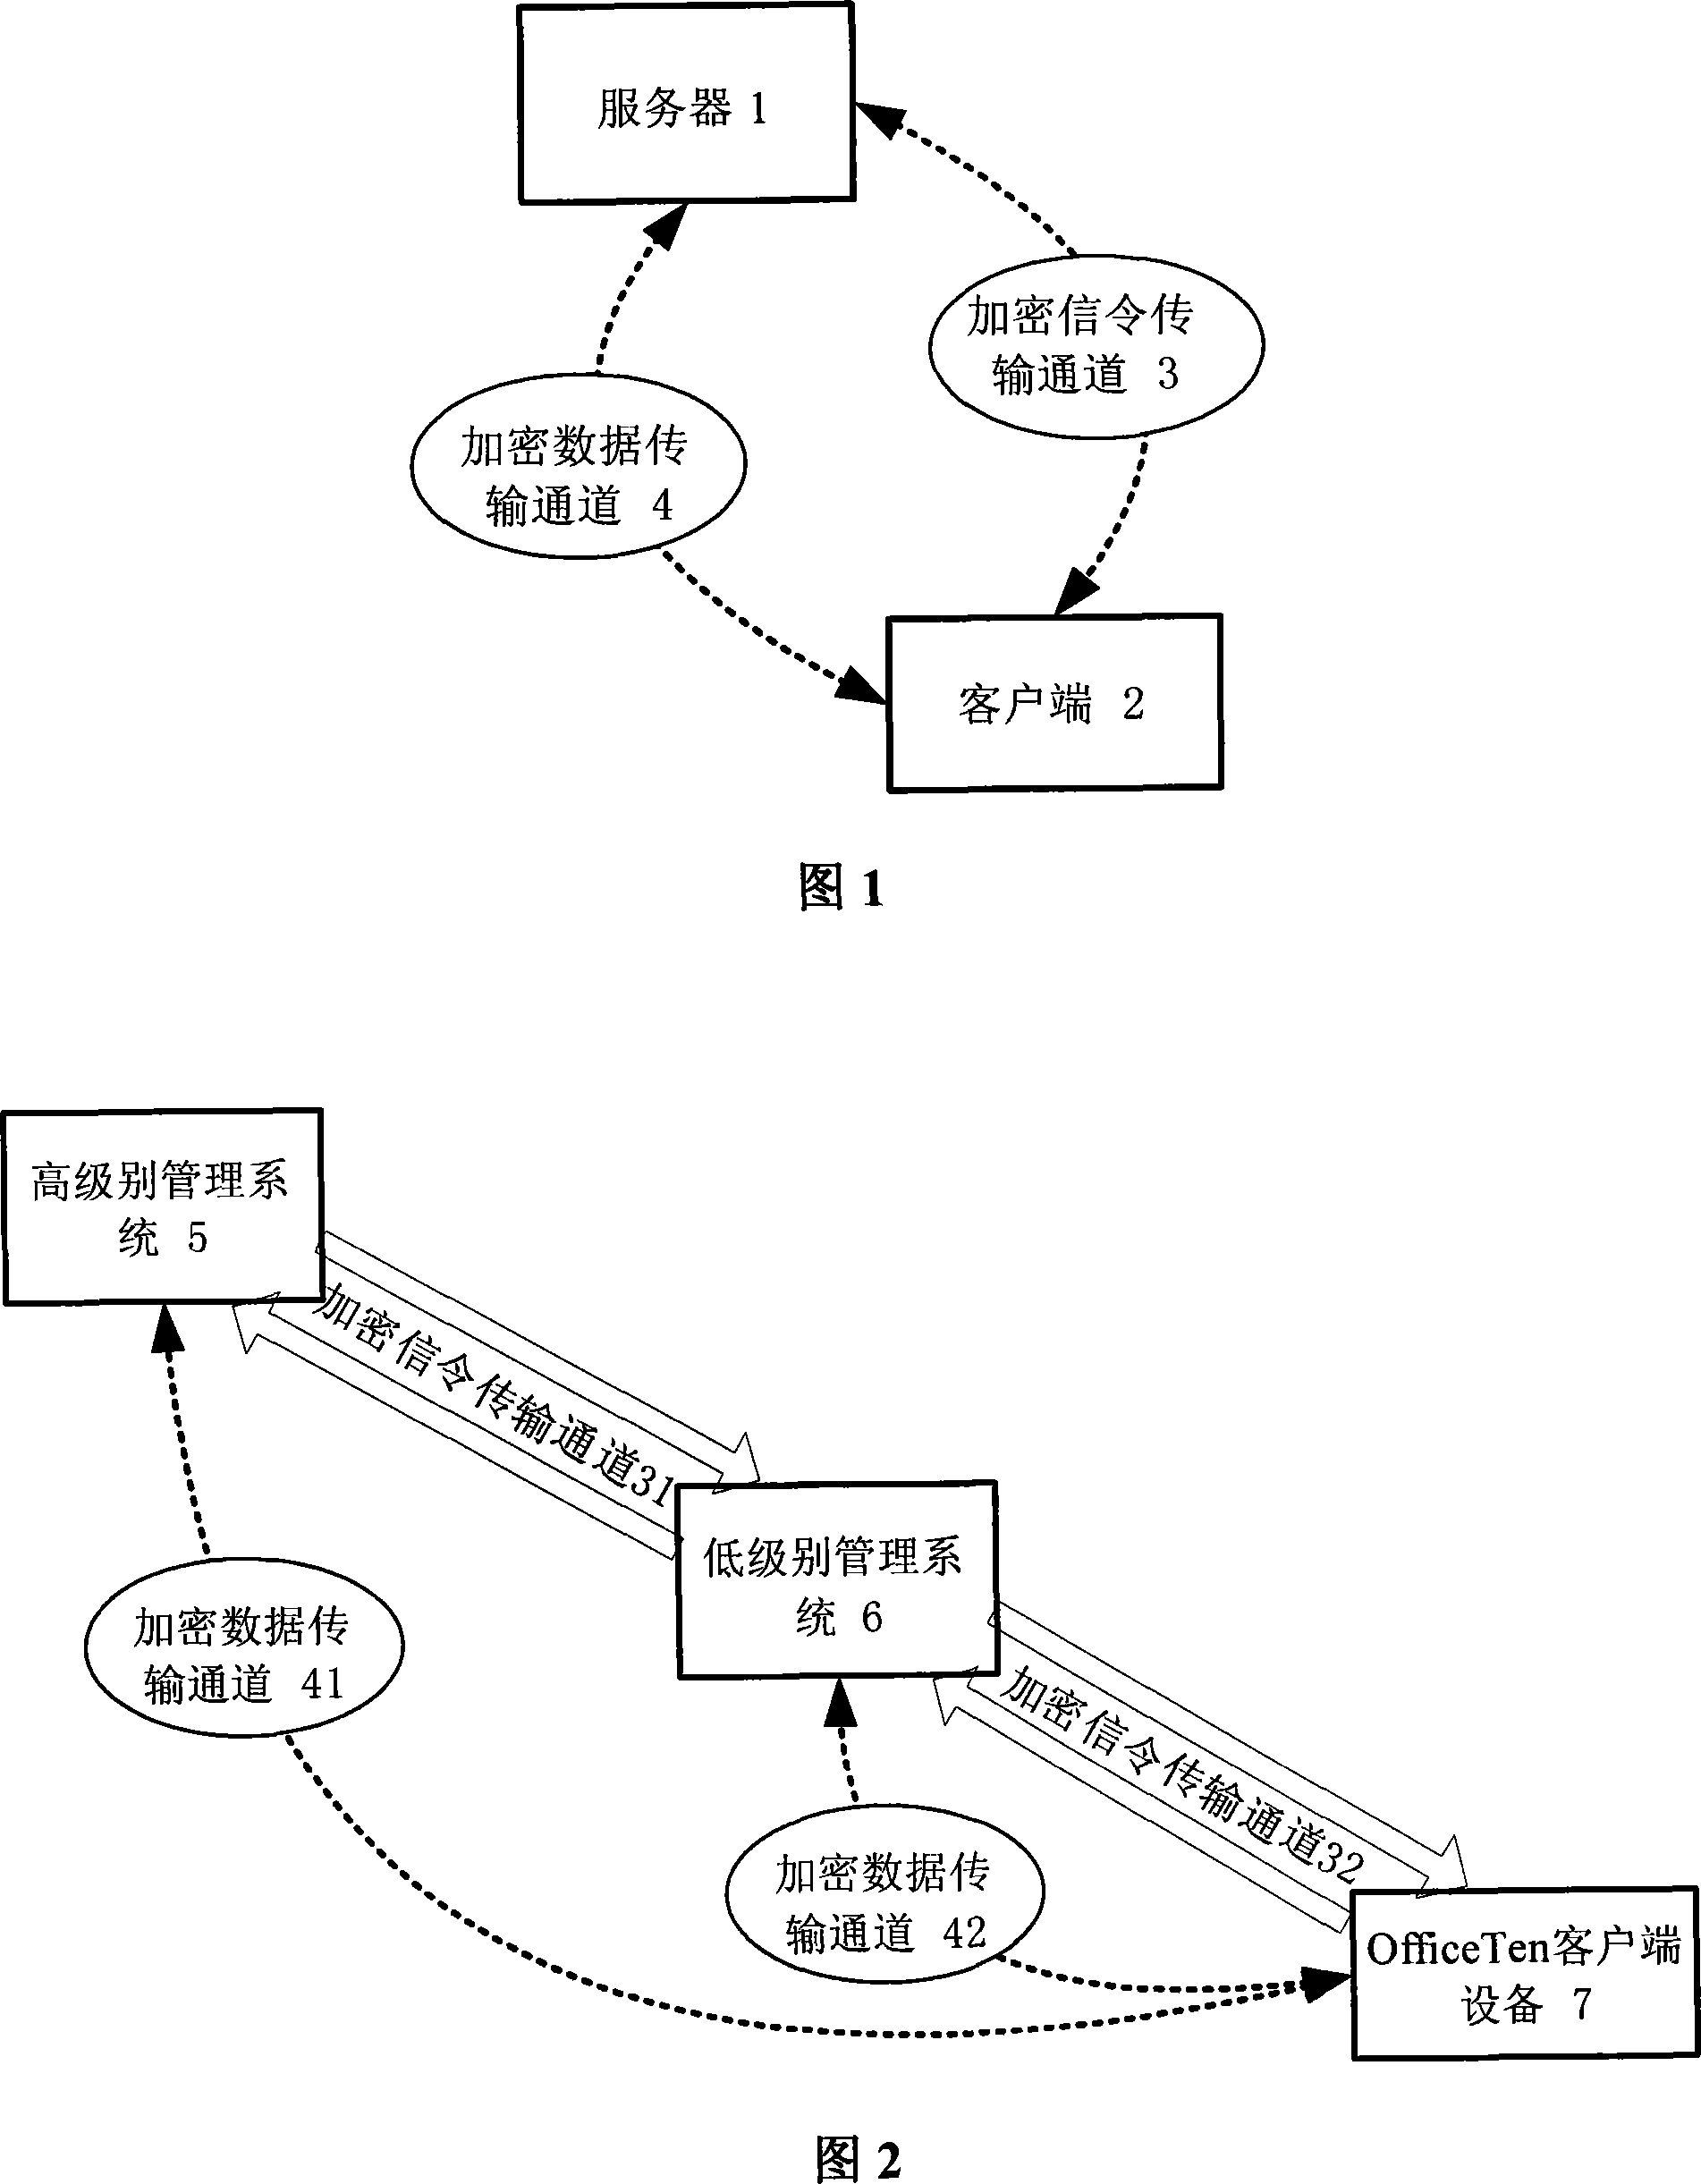 Security management method of dual-encryption channel cooperation in network management system